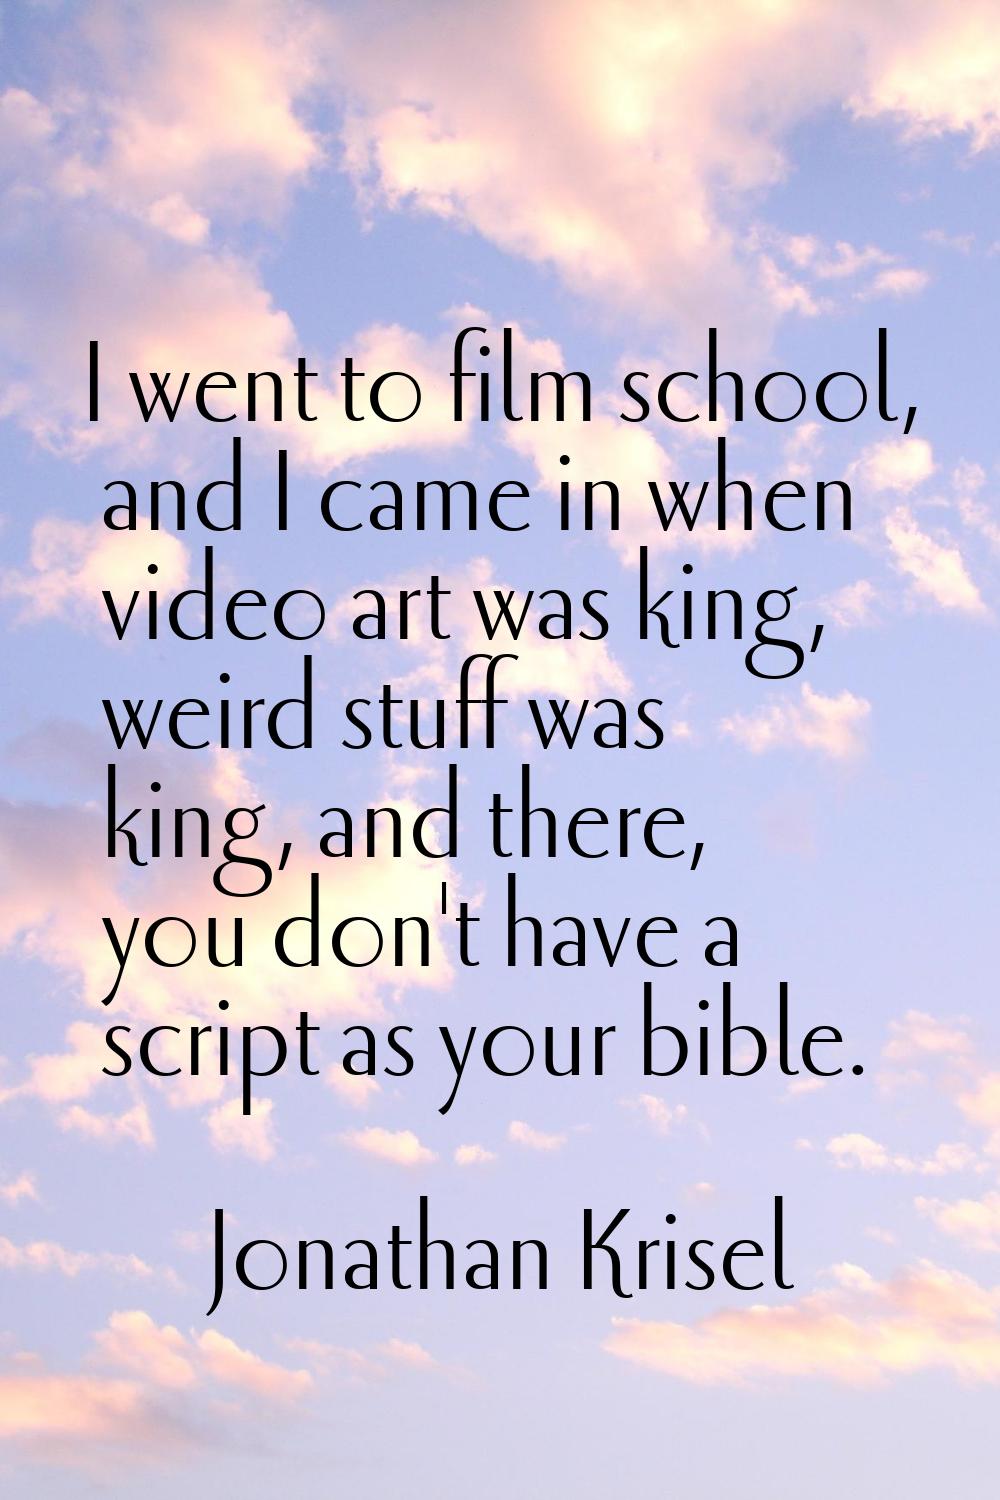 I went to film school, and I came in when video art was king, weird stuff was king, and there, you 